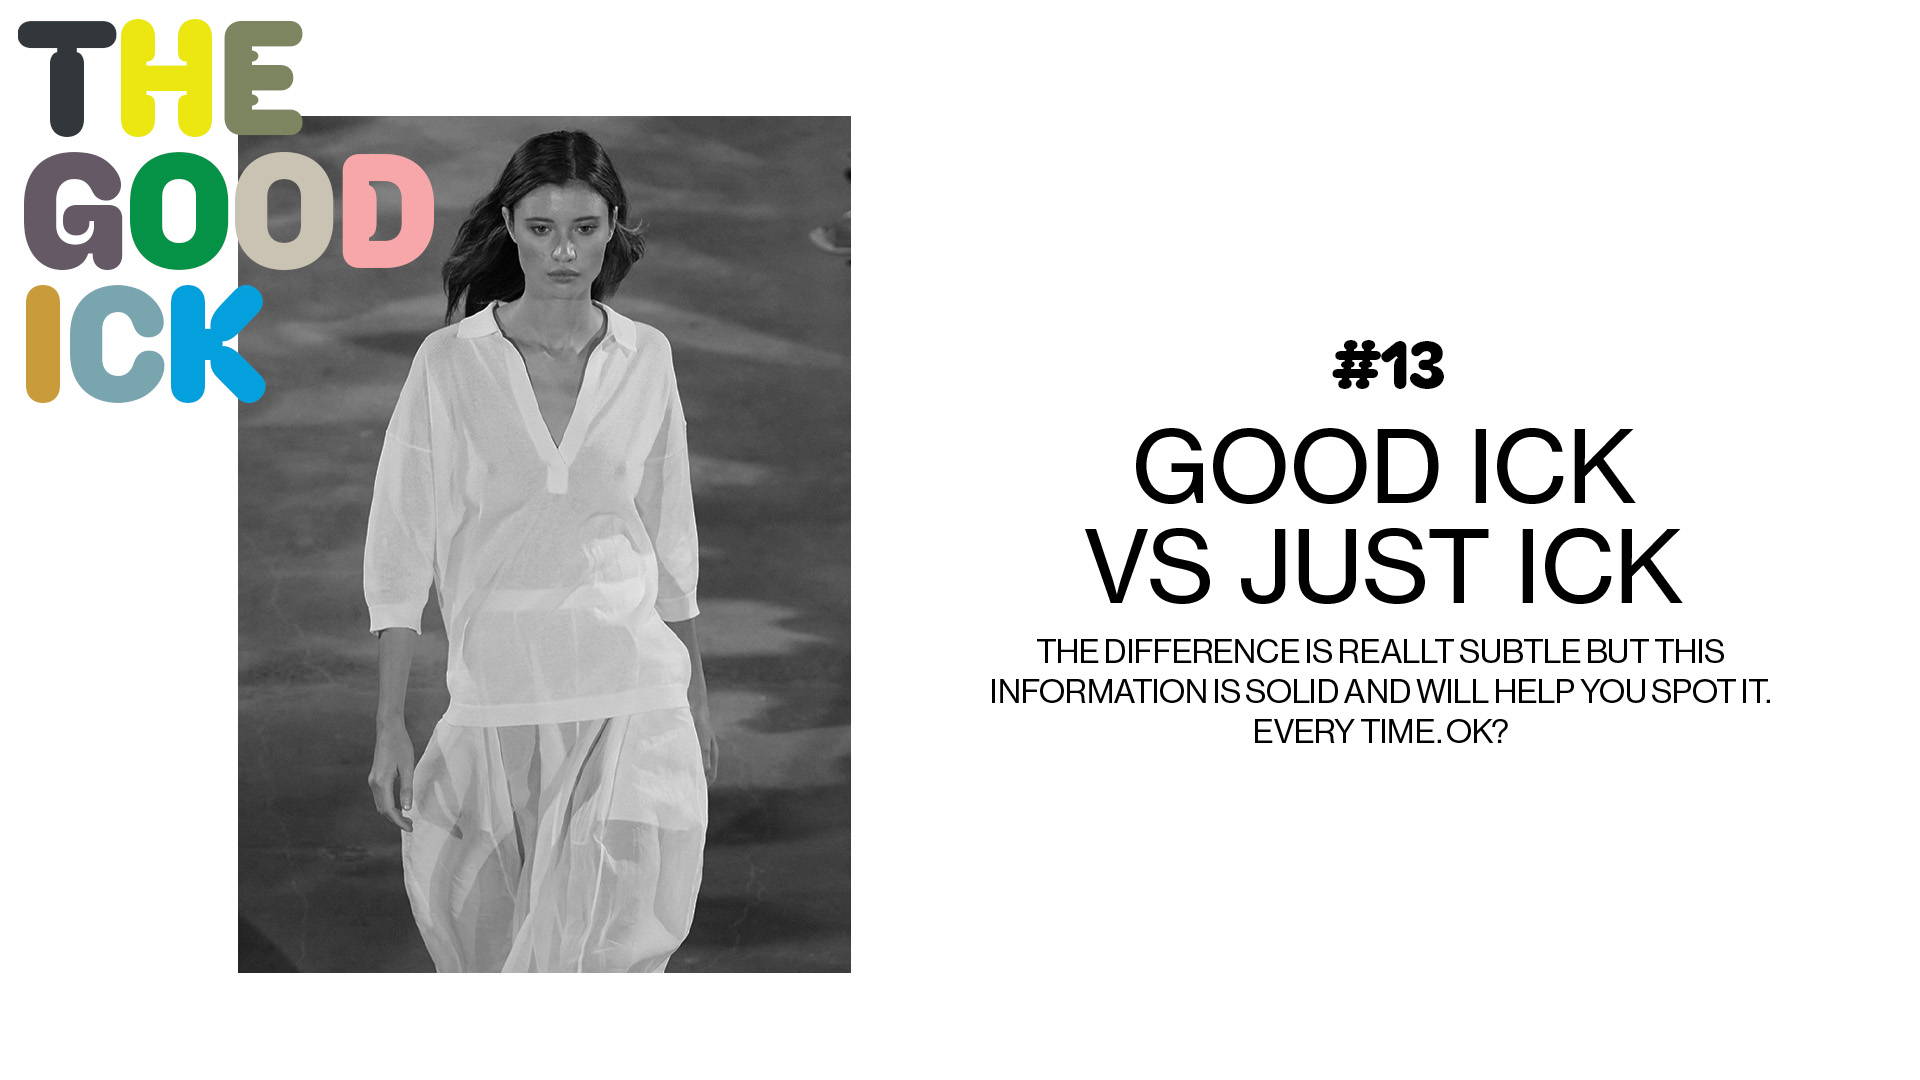 The Good Ick #13: Good Ick VS Just Ick